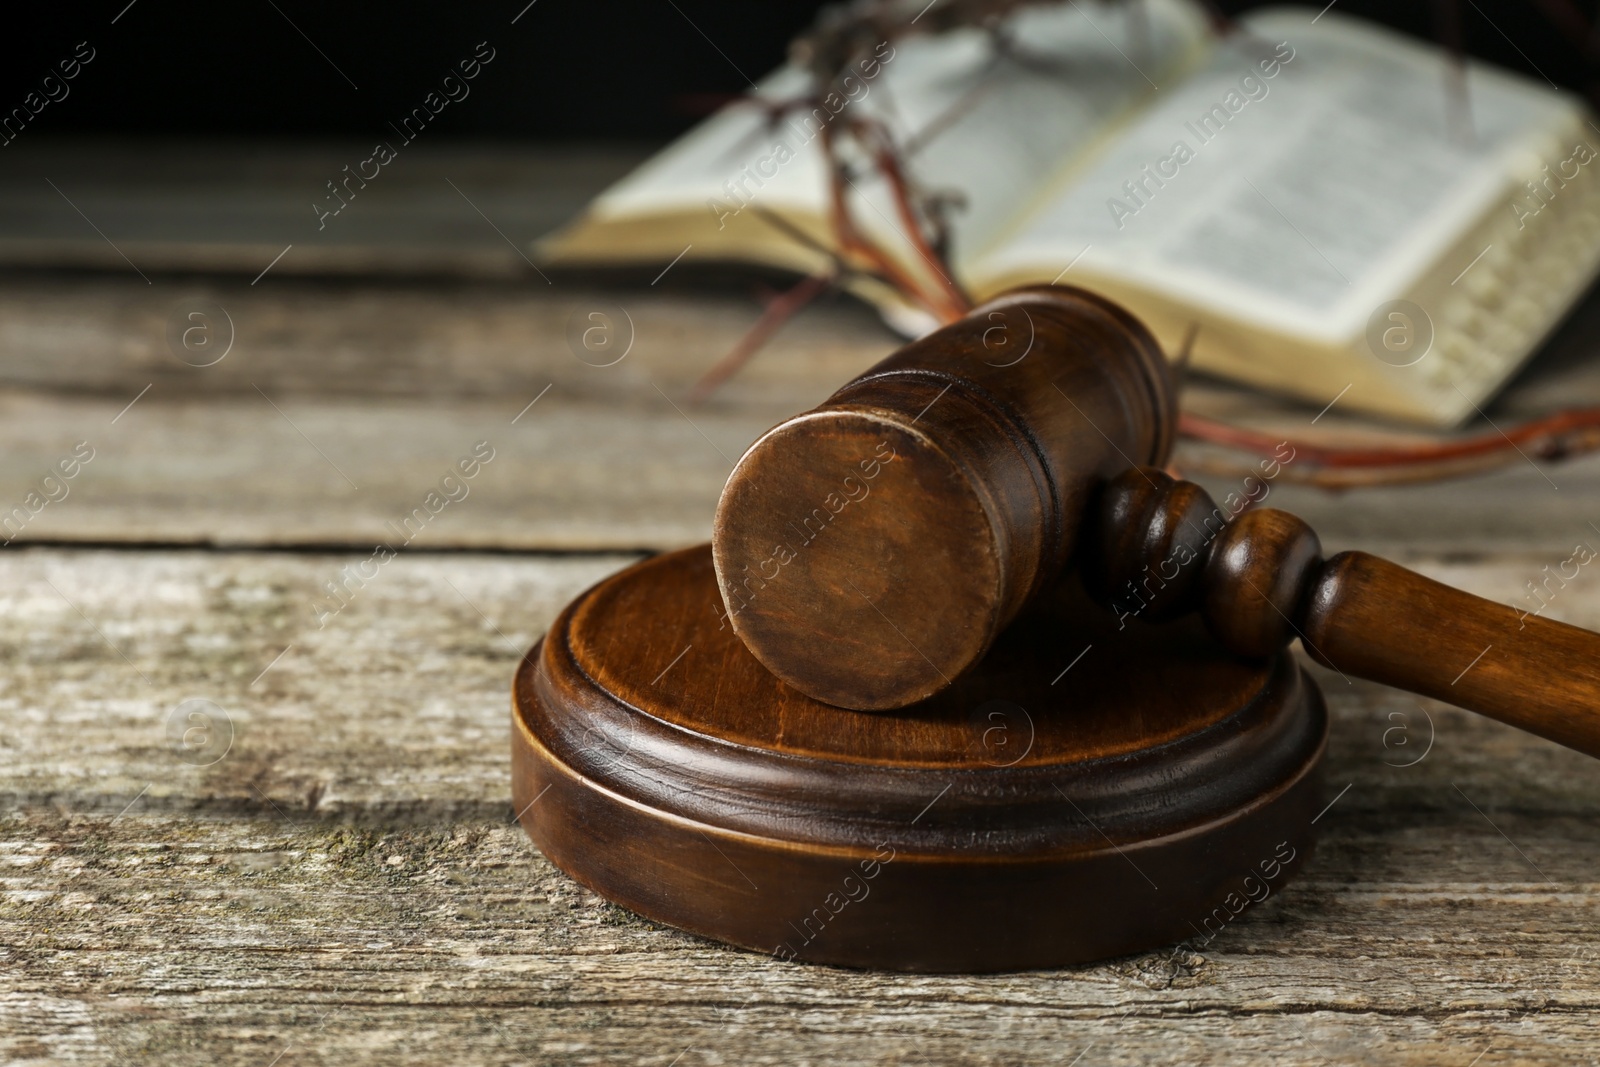 Photo of Judge gavel on old wooden table, closeup. Space for text